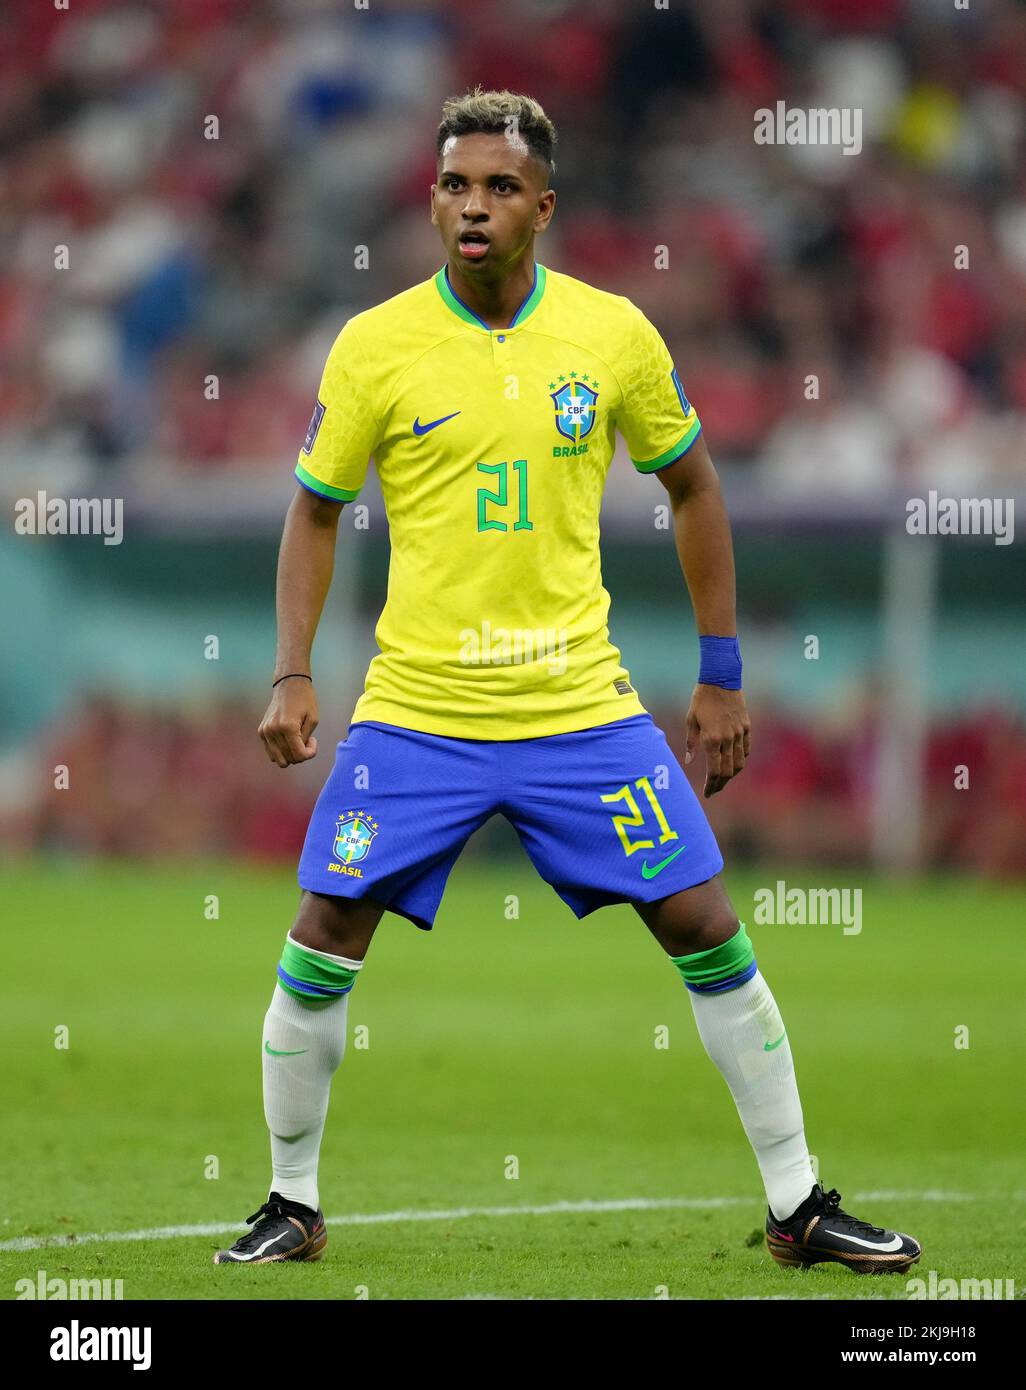 https://c8.alamy.com/comp/2KJ9H18/brazils-rodrygo-during-the-fifa-world-cup-group-g-match-at-the-lusail-stadium-in-lusail-qatar-picture-date-thursday-november-24-2022-2KJ9H18.jpg